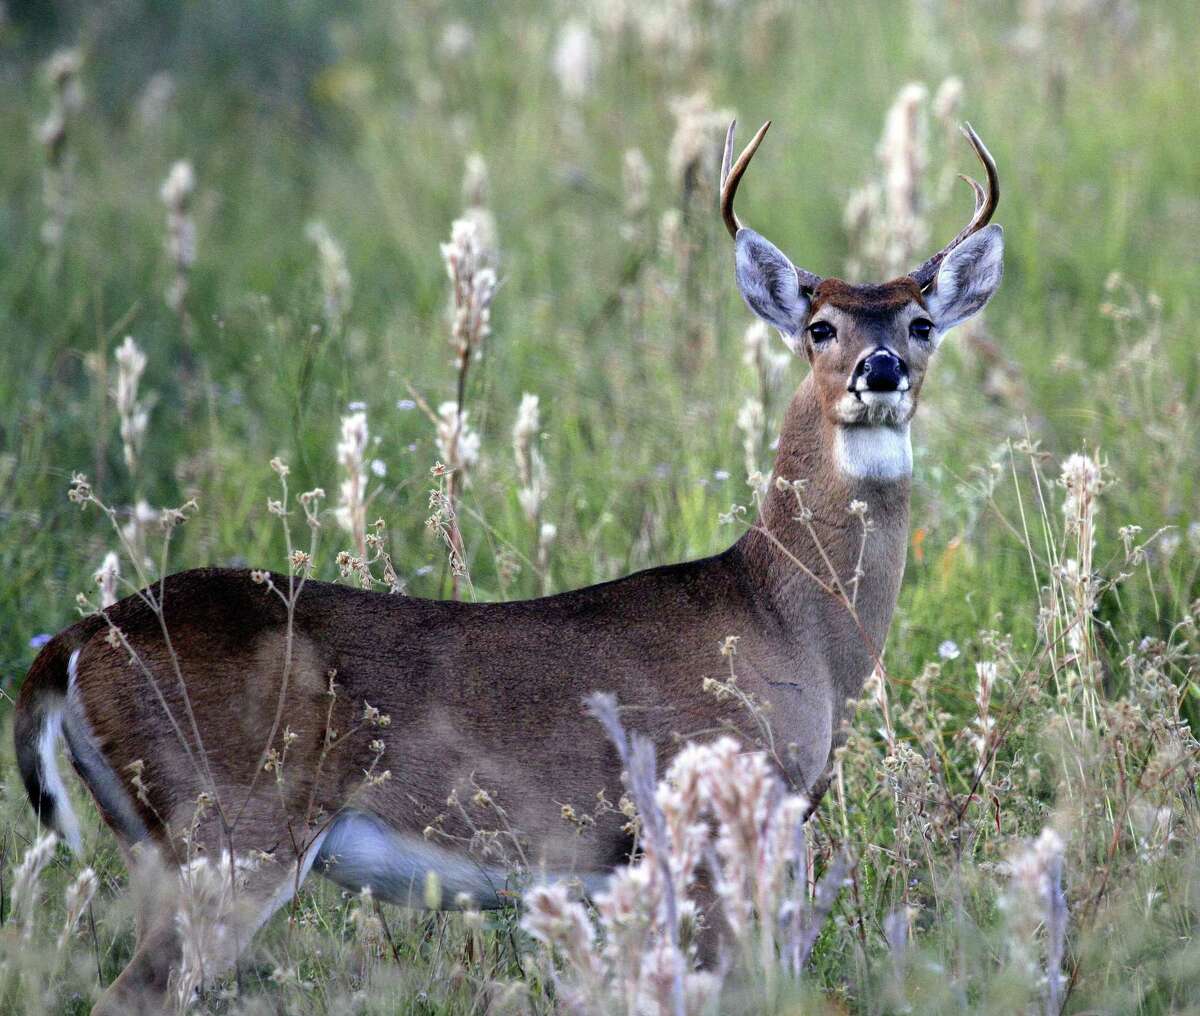 Recently published results of a first-of-it-kind study indicates chronic wasting disease, a transmissible disease affecting the brains of deer and other cervids, causes long-term decline of a free-ranging whitetail deer herd.